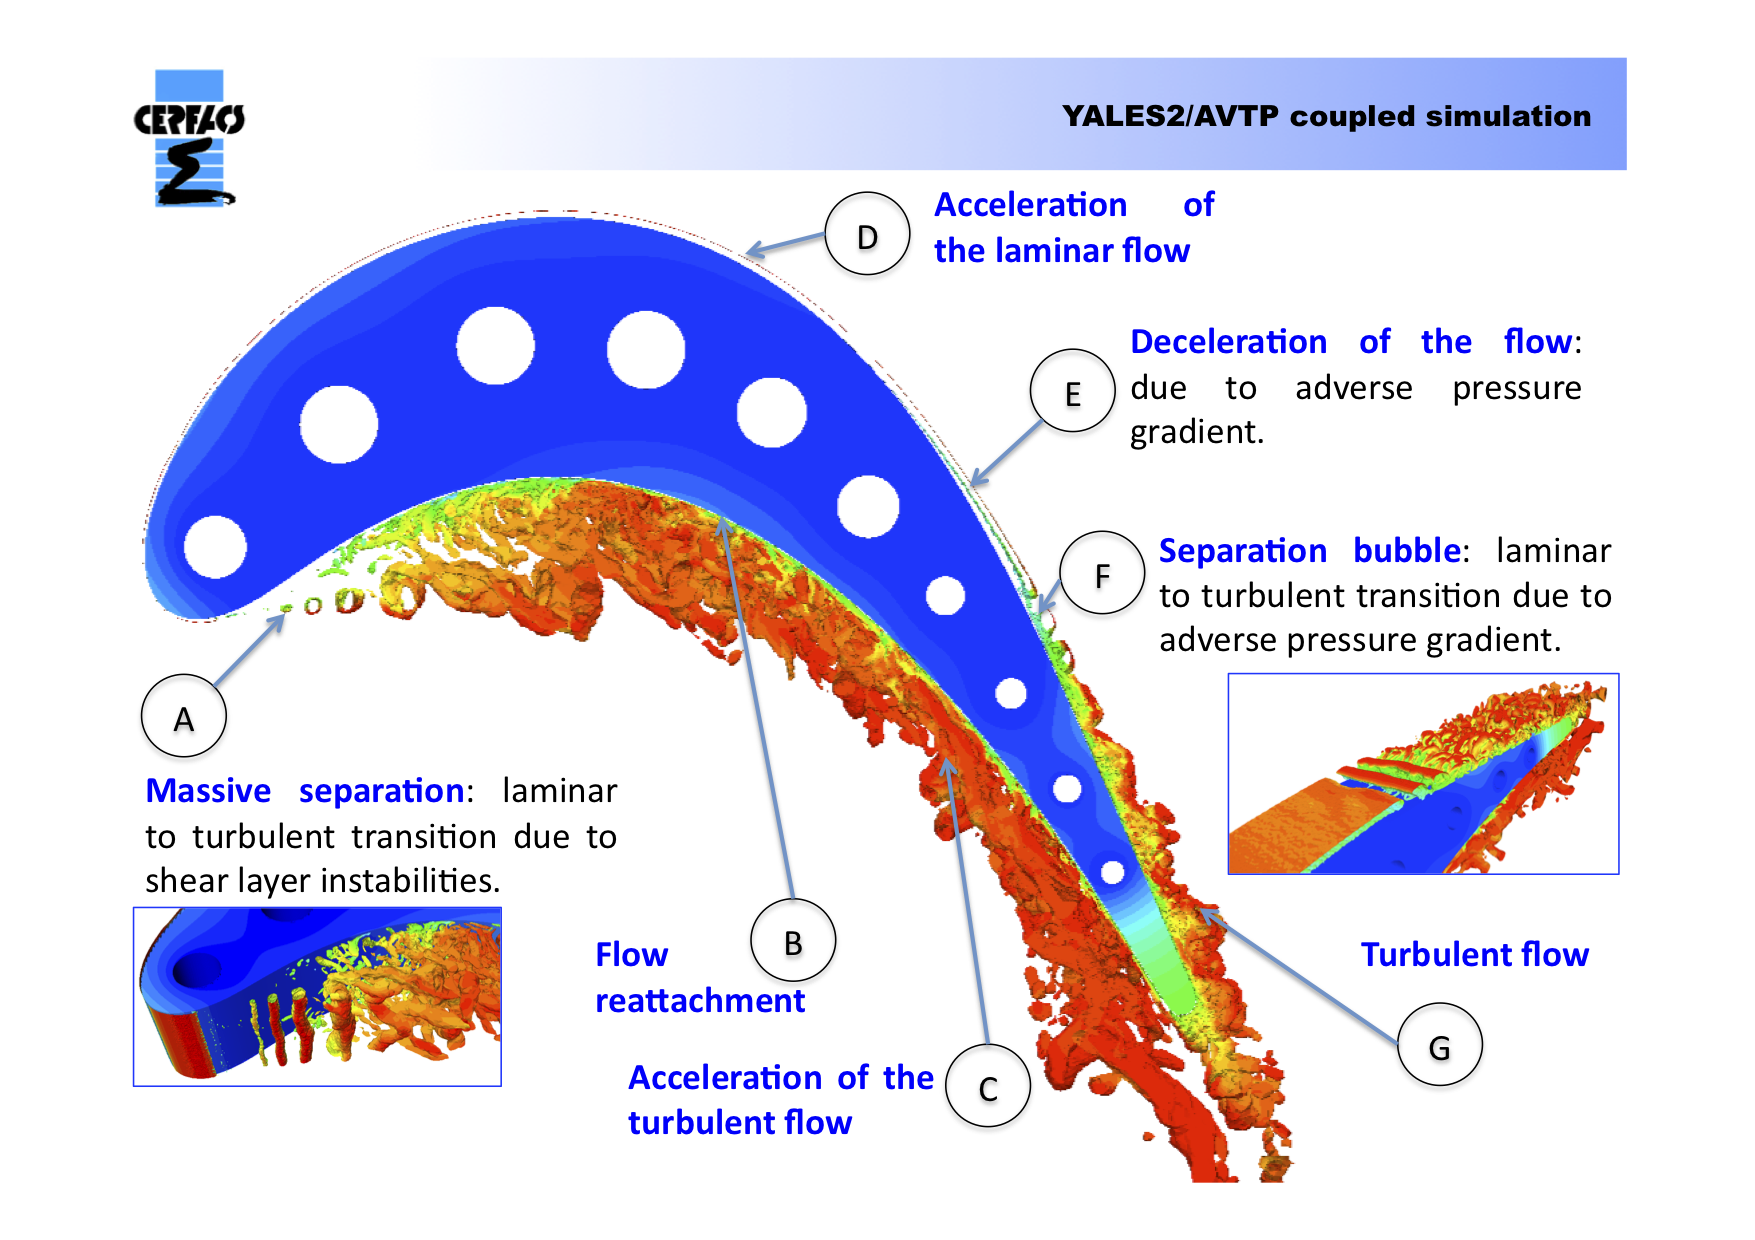 Conjugate heat transfer in a higly loaded low pressure turbine blade (European Project AITEB2)
                <br><B>Codes used: </B>YALES2, AVTP / AVBP, AVTP
                <br><B>Reference: </B><a href='http://turbomachinery.asmedigitalcollection.asme.org/article.aspx?articleid=1761870' target=new>Journal of Turbomachinery</a>